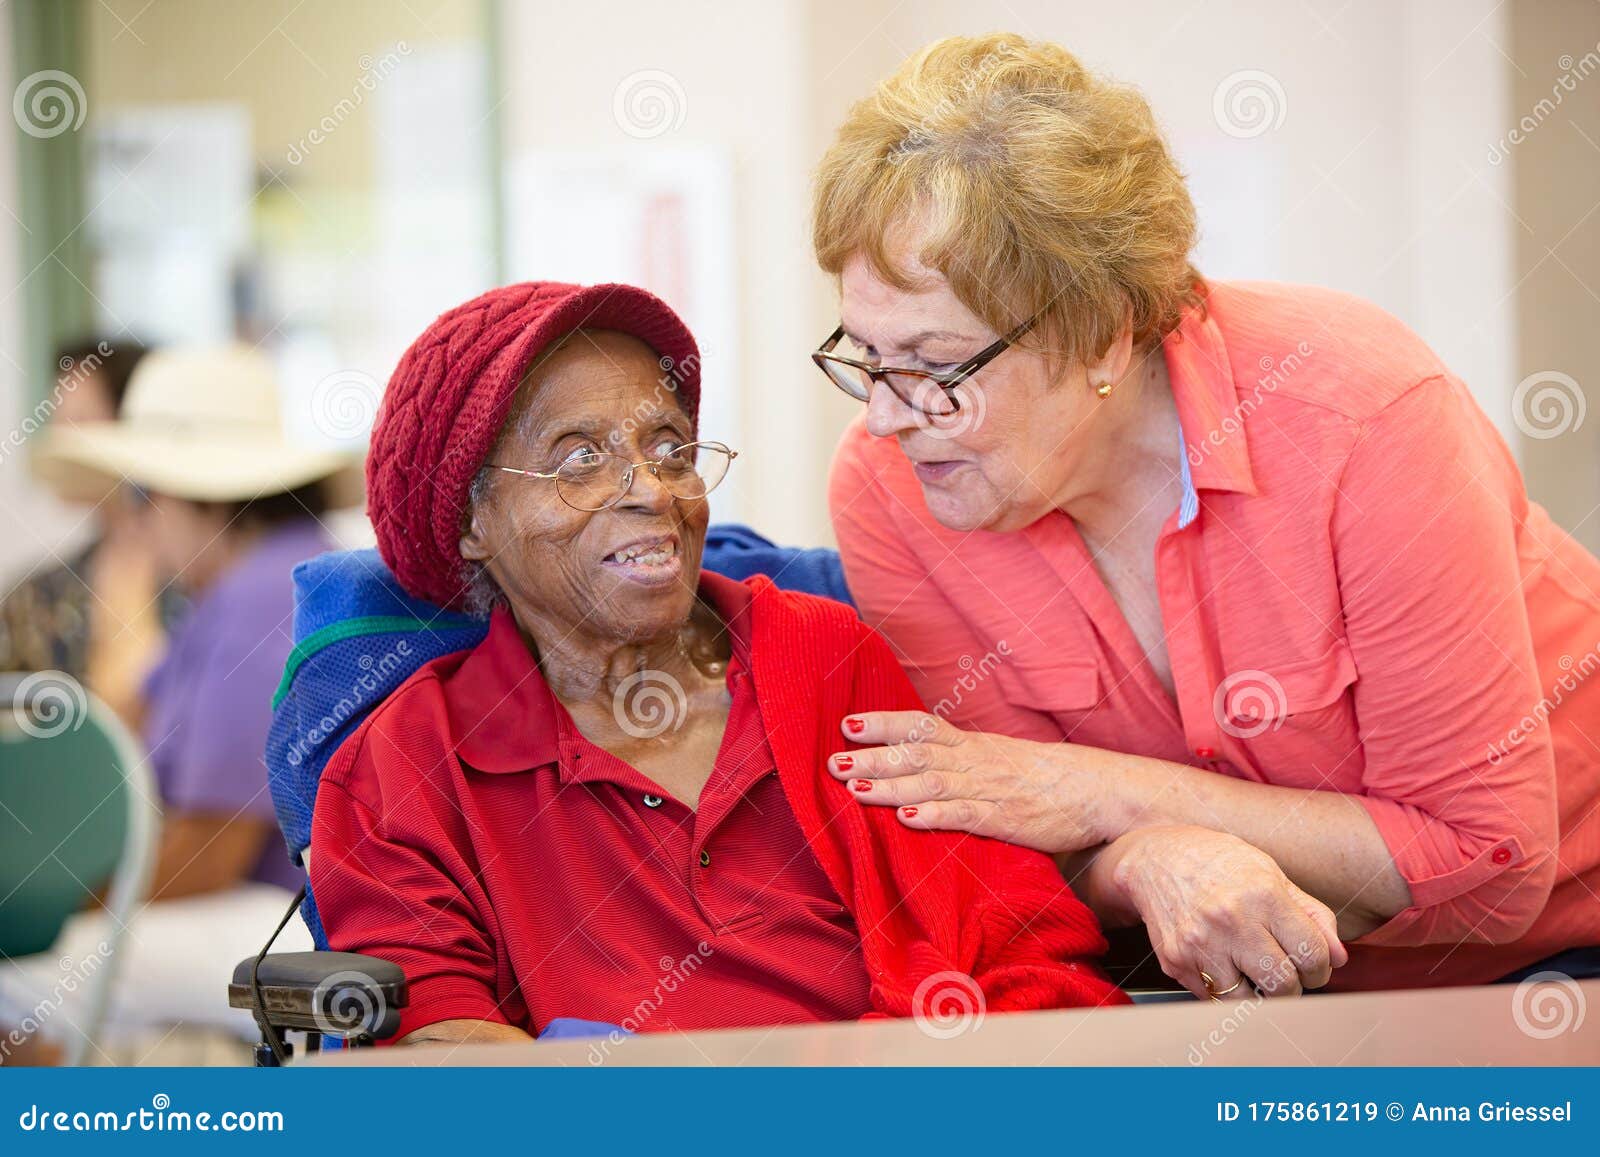 Older Woman Together in a Busy Senior Center Stock Image - Image of citizen,  helper: 175861219